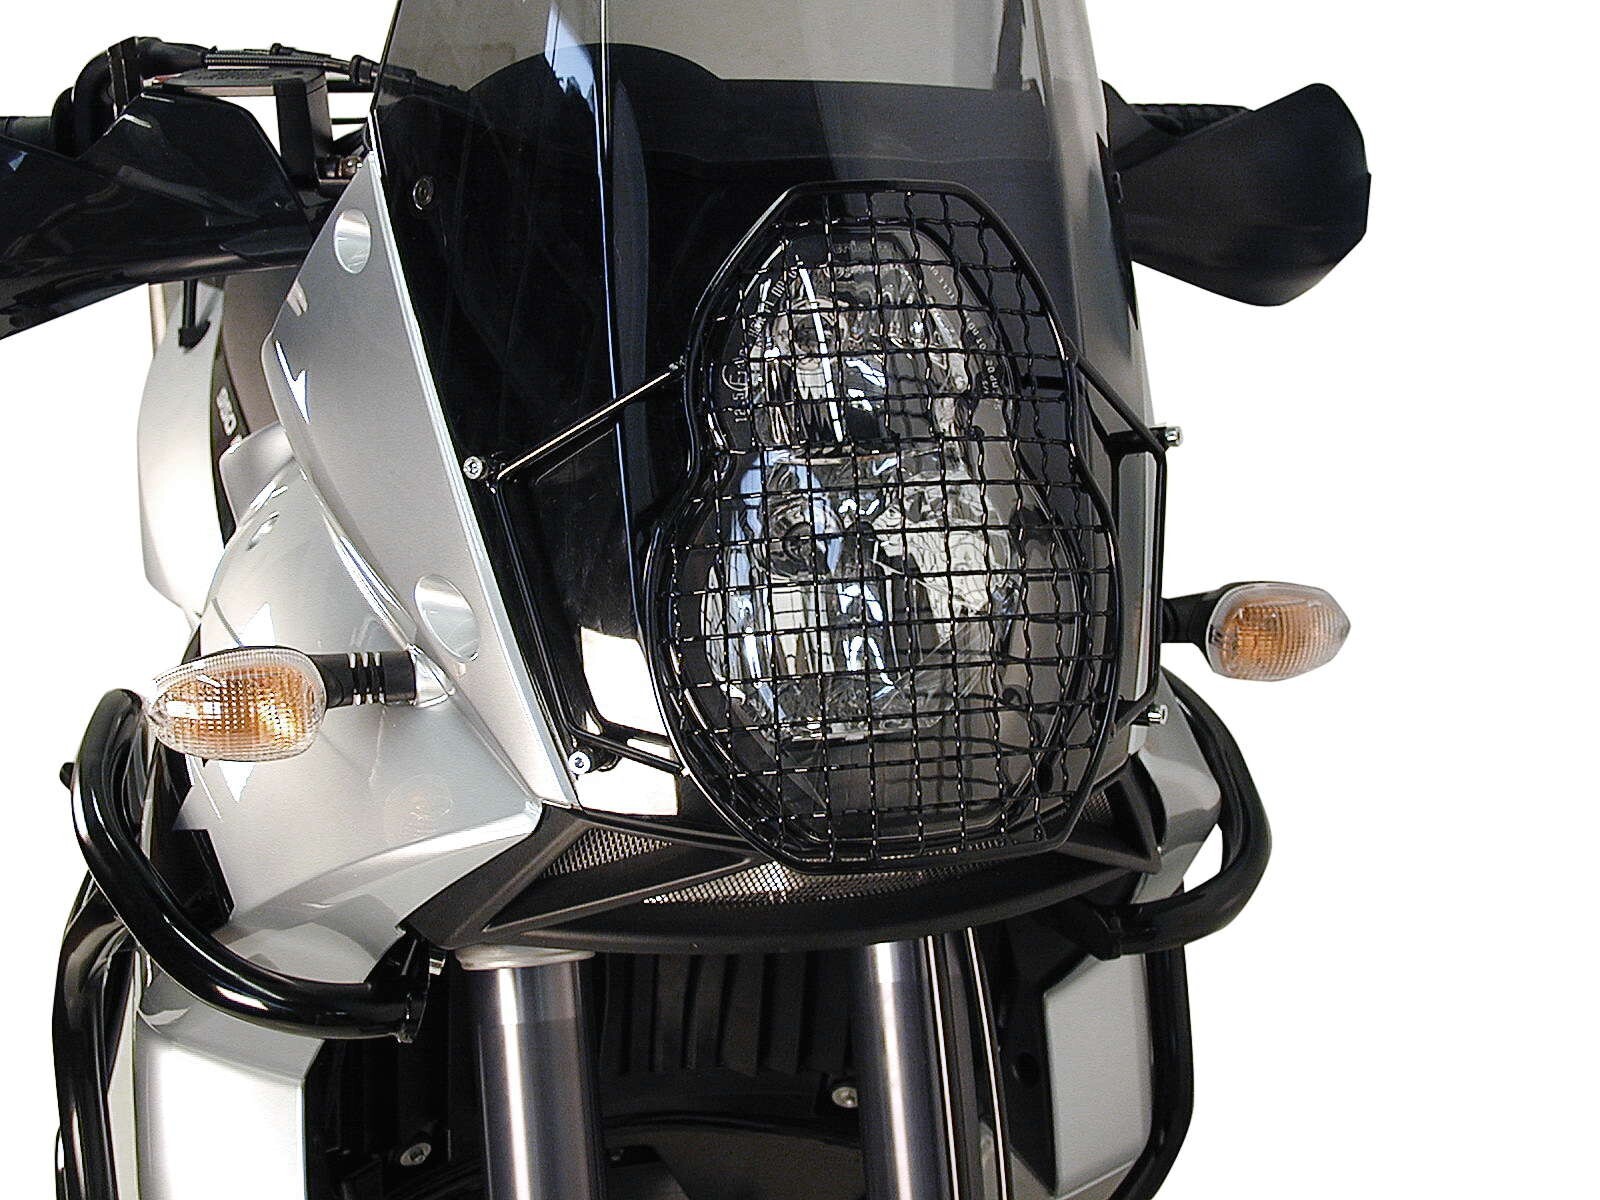 Hepco and Becker HEADLIGHT GRILL FOR KTM 950 LC 8 ADVENTURE / S